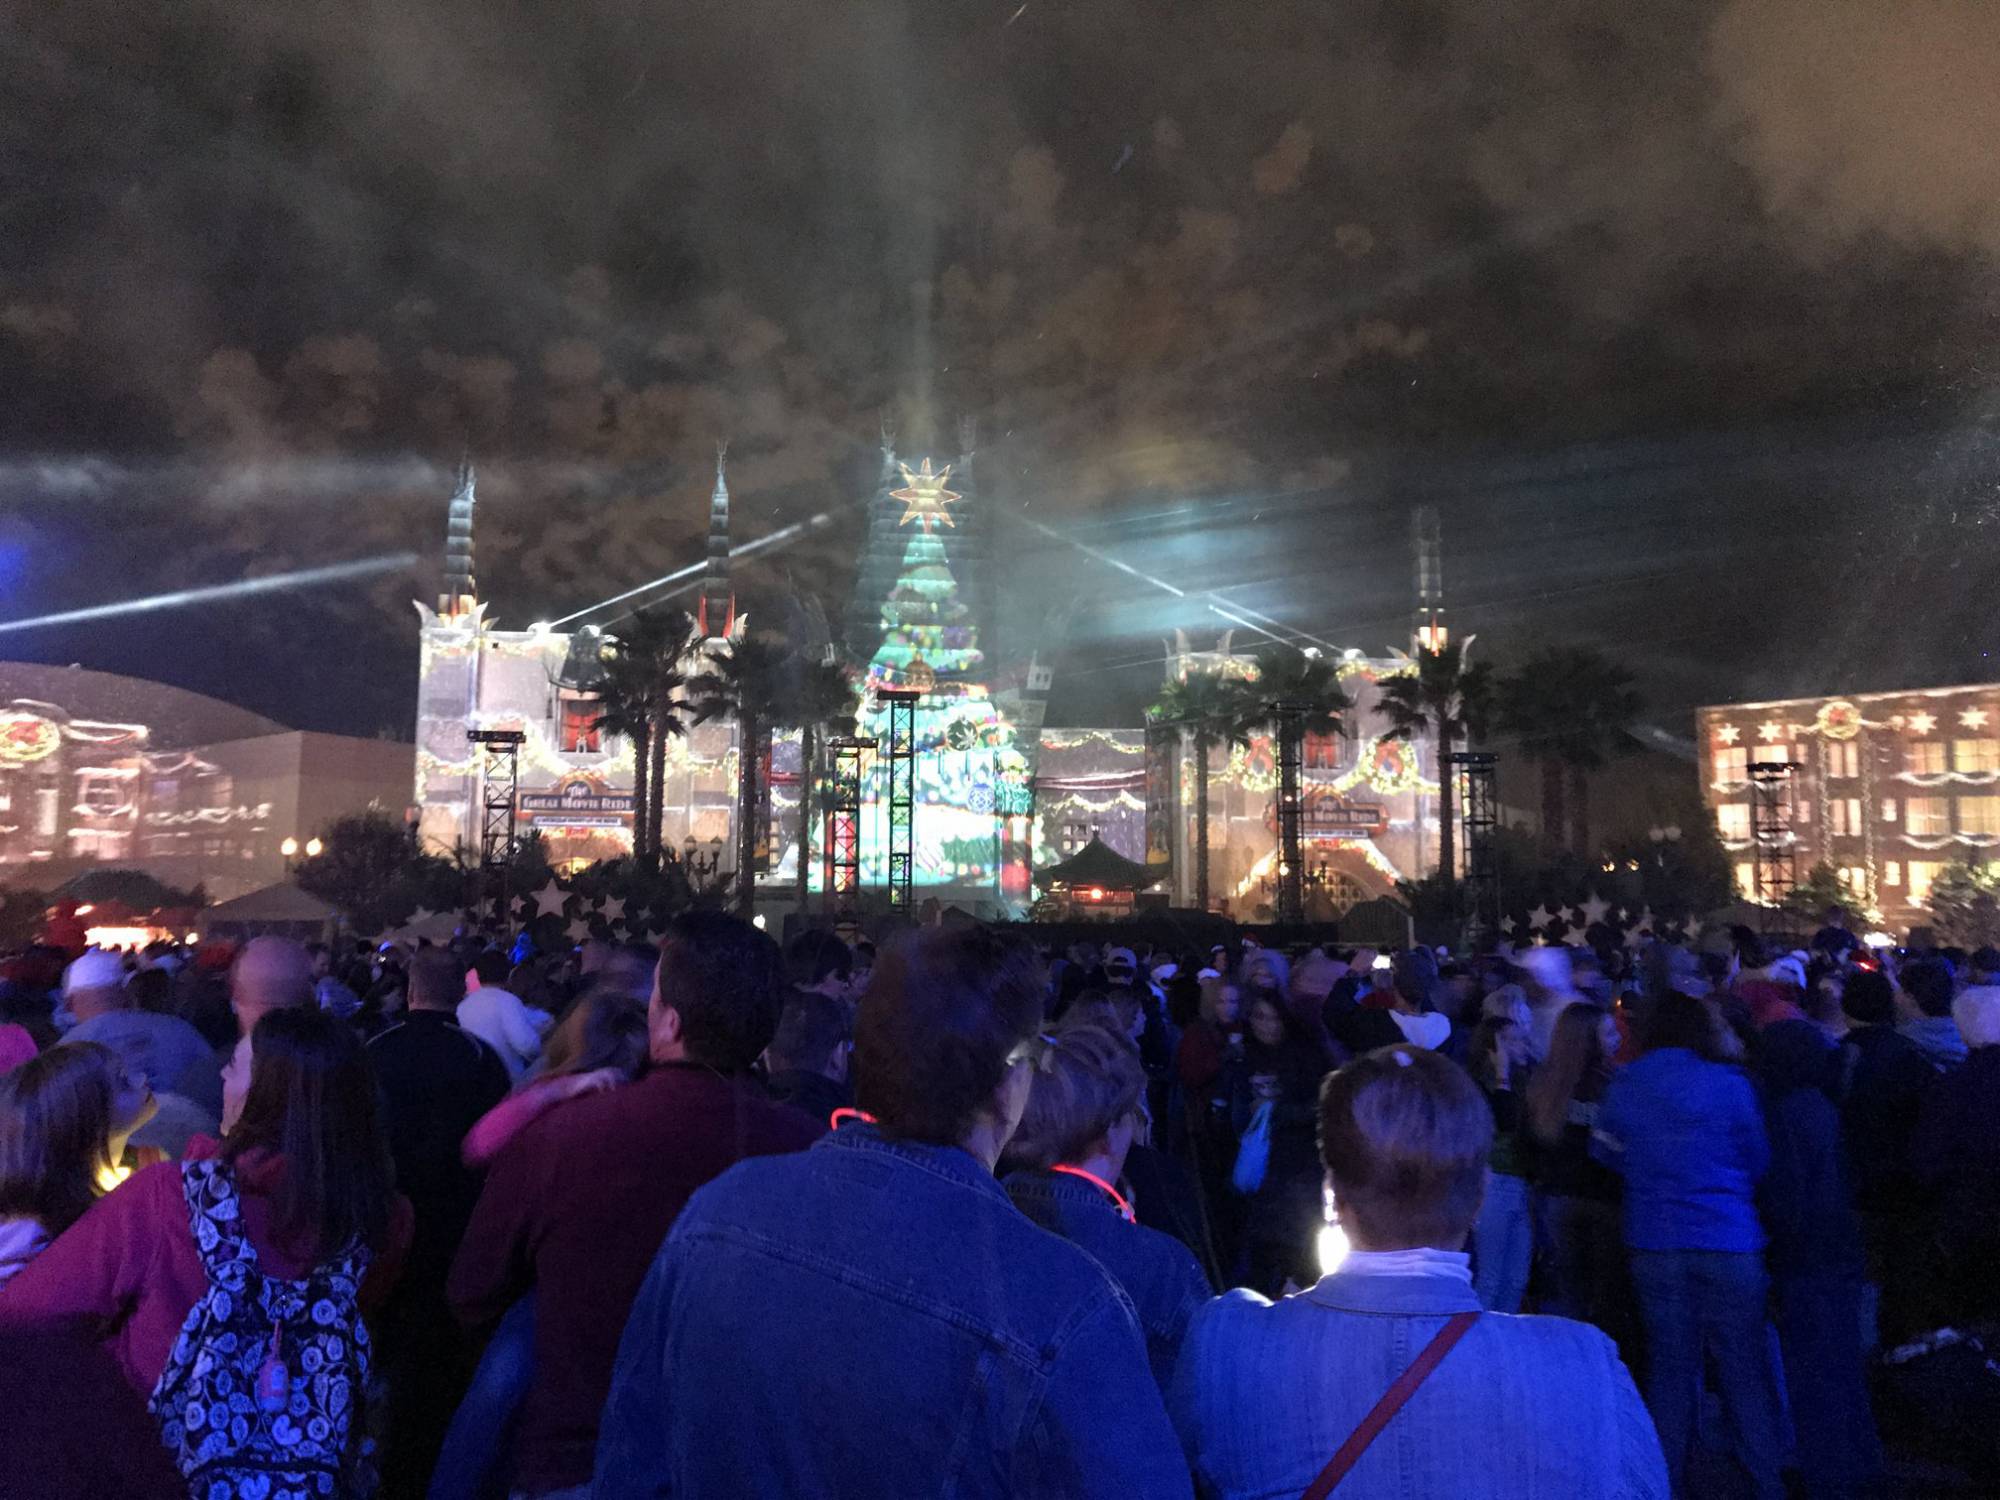 A review of the Jingle Bell, Jingle BAM! Holiday Dessert Party |PassPorter.com